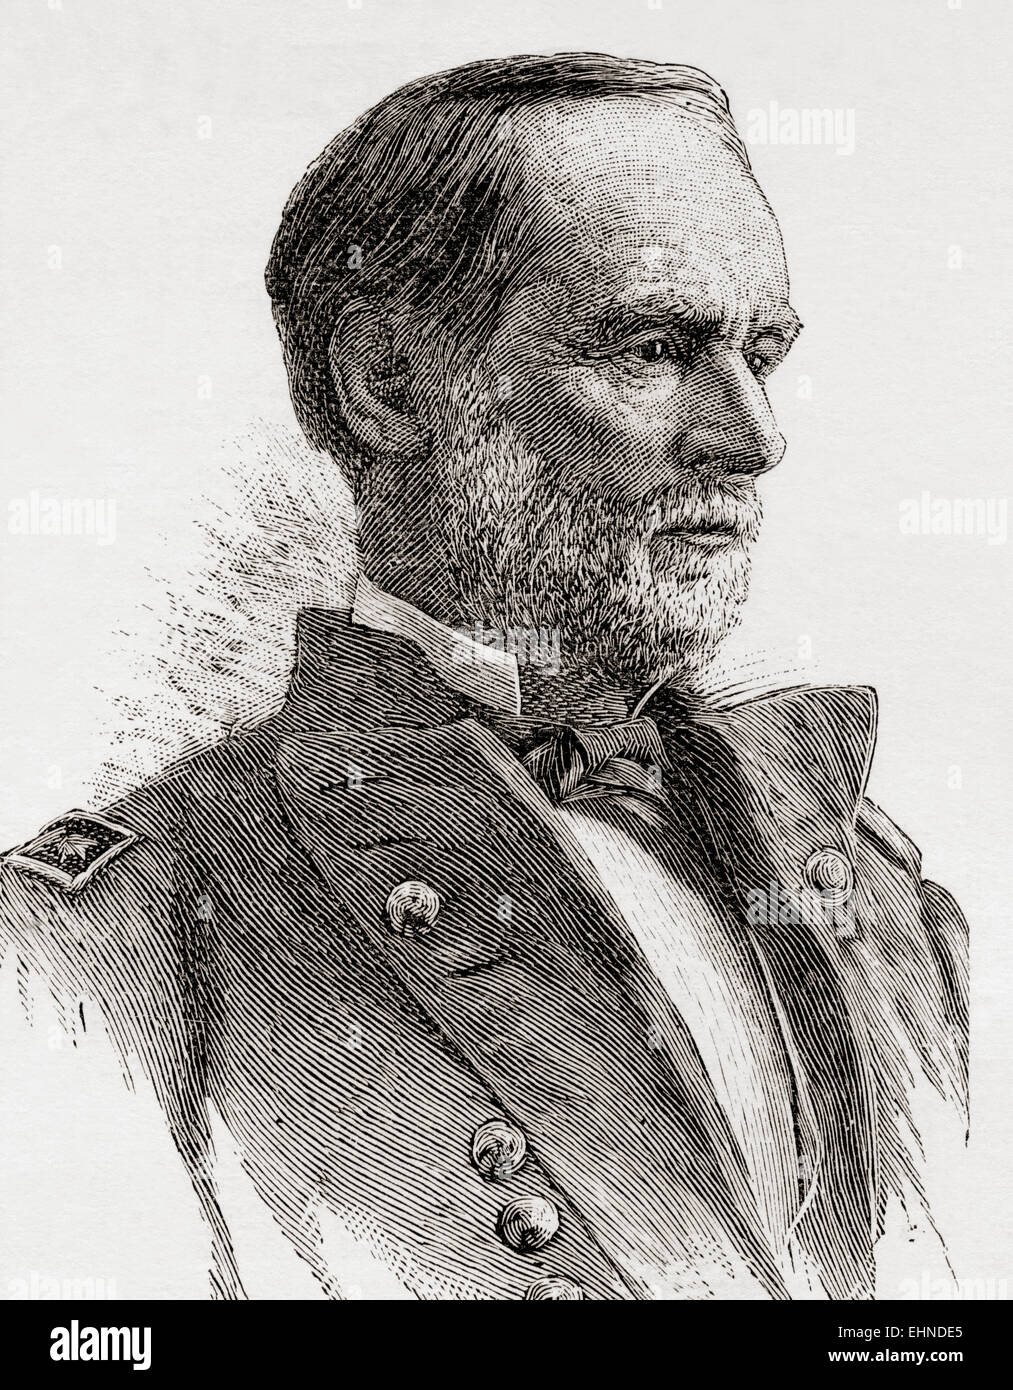 William Tecumseh Sherman, 1820 – 1891.  American soldier, businessman, educator and author. General in the Union Army during the American Civil War. Stock Photo